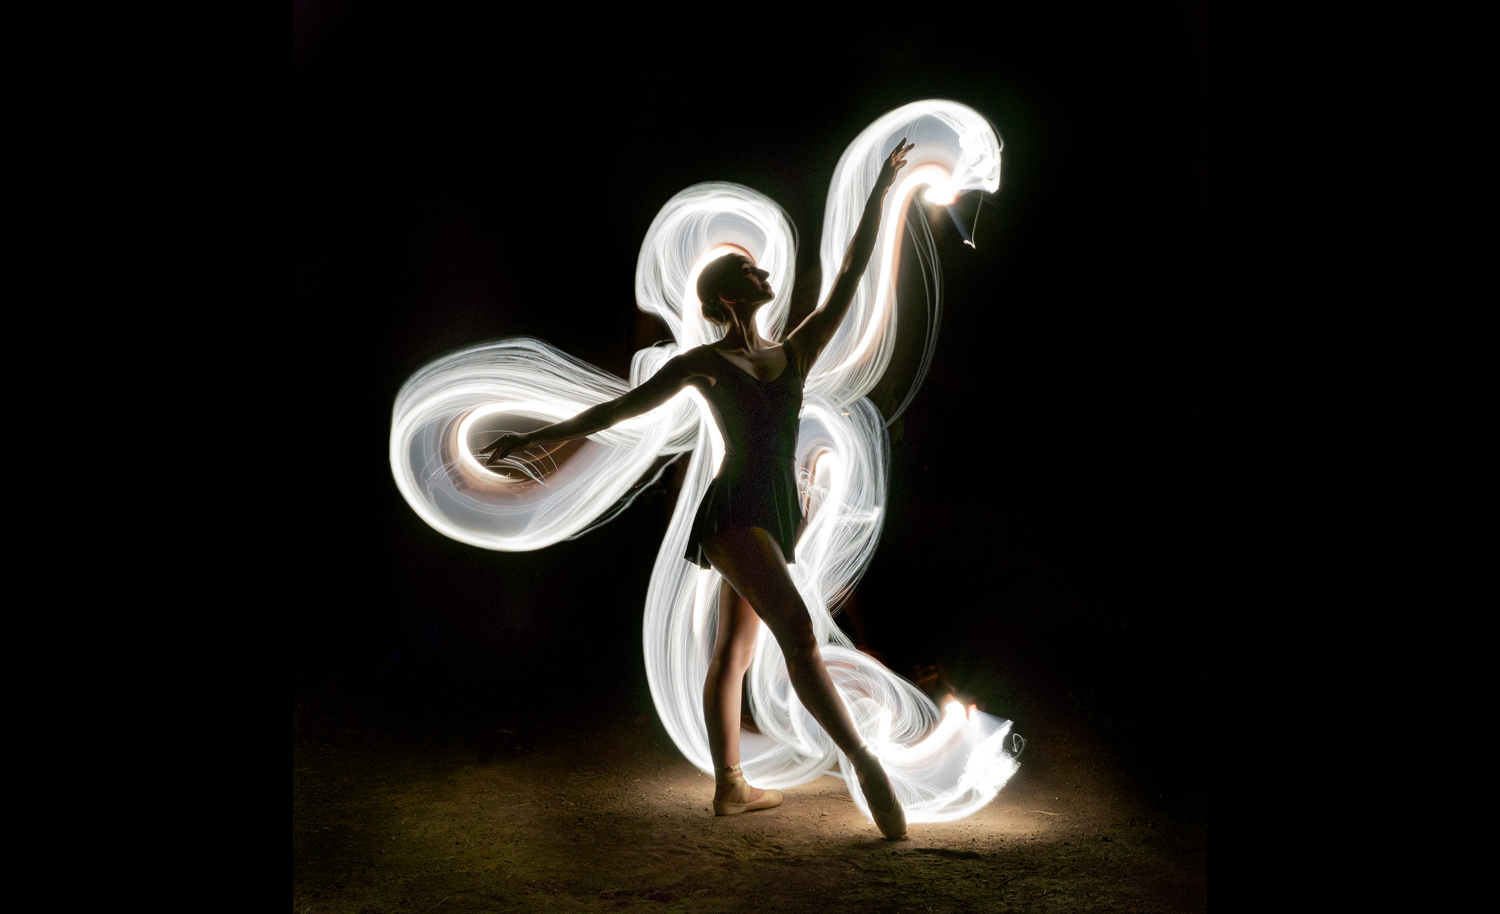 The Art of Light Painting - Olympus Passion